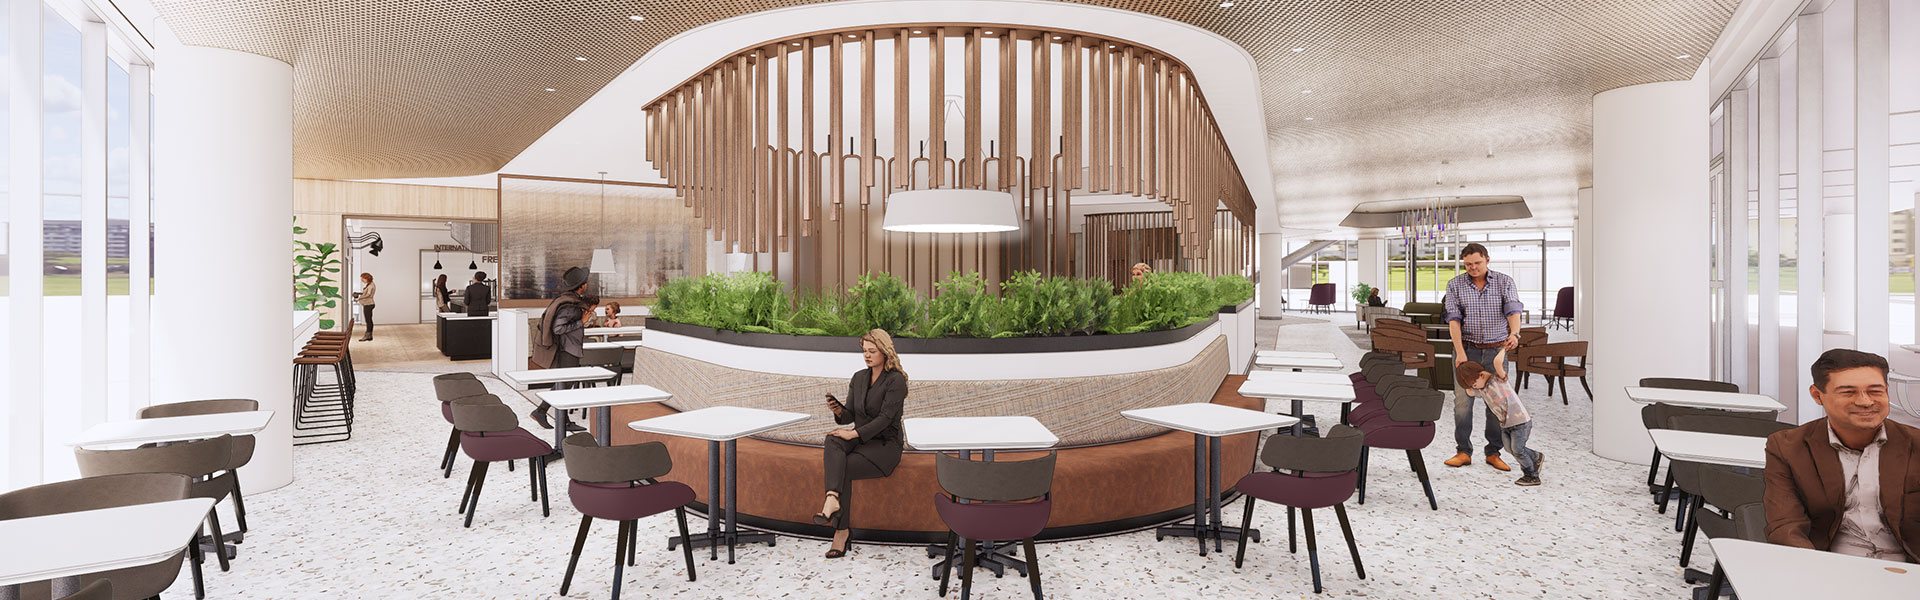 Rendering of South Meadows Common Dining Area